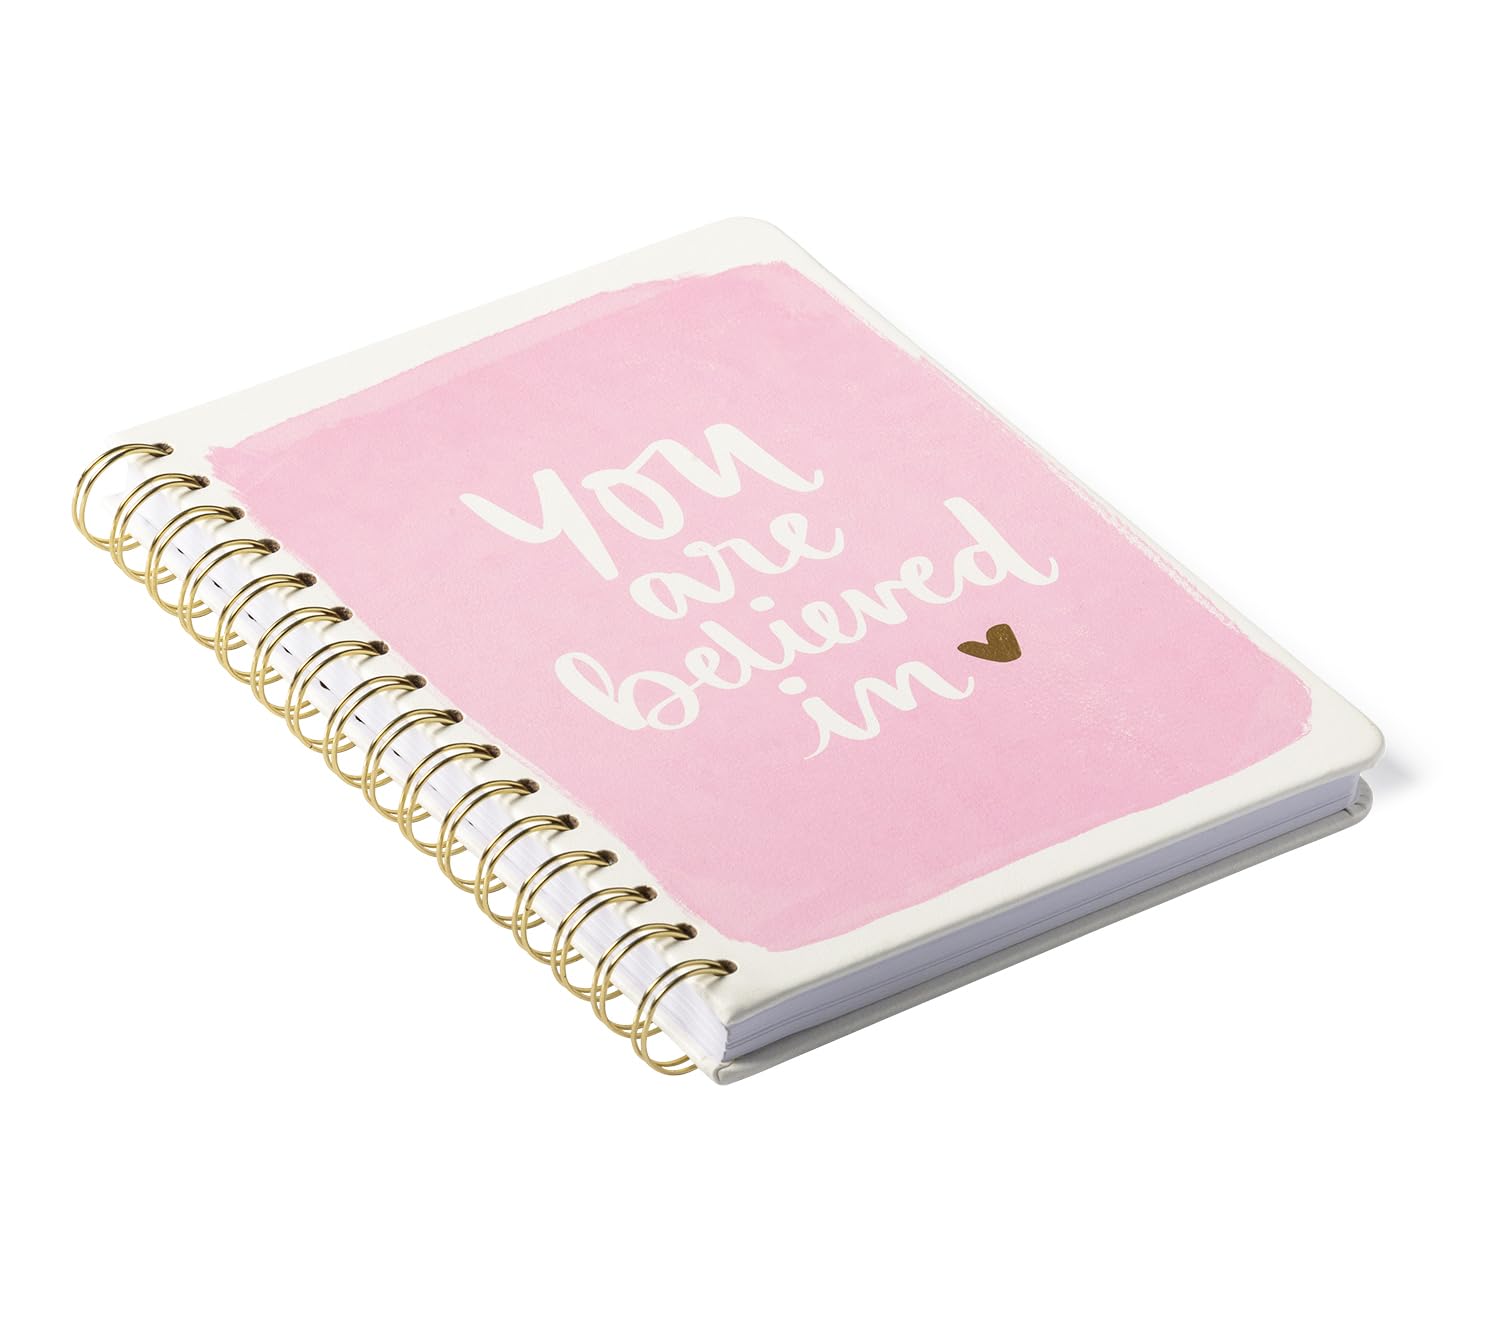 200 Pages Acid-free Ruled Sheets Notebook